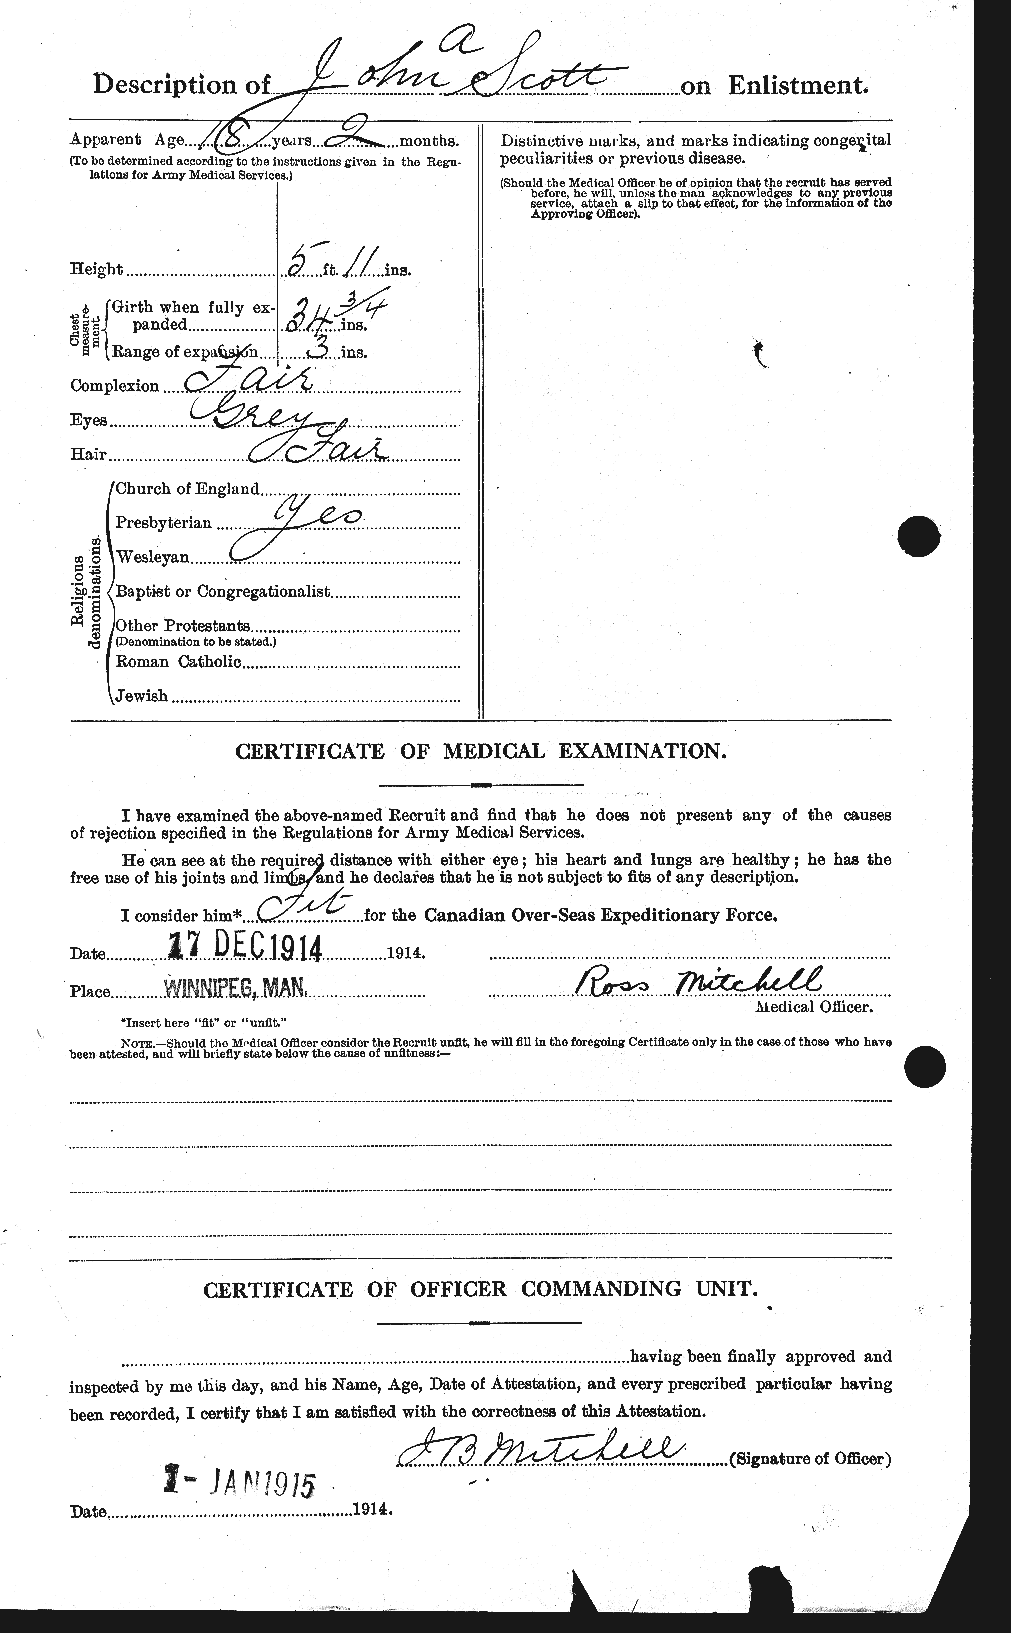 Personnel Records of the First World War - CEF 084663b